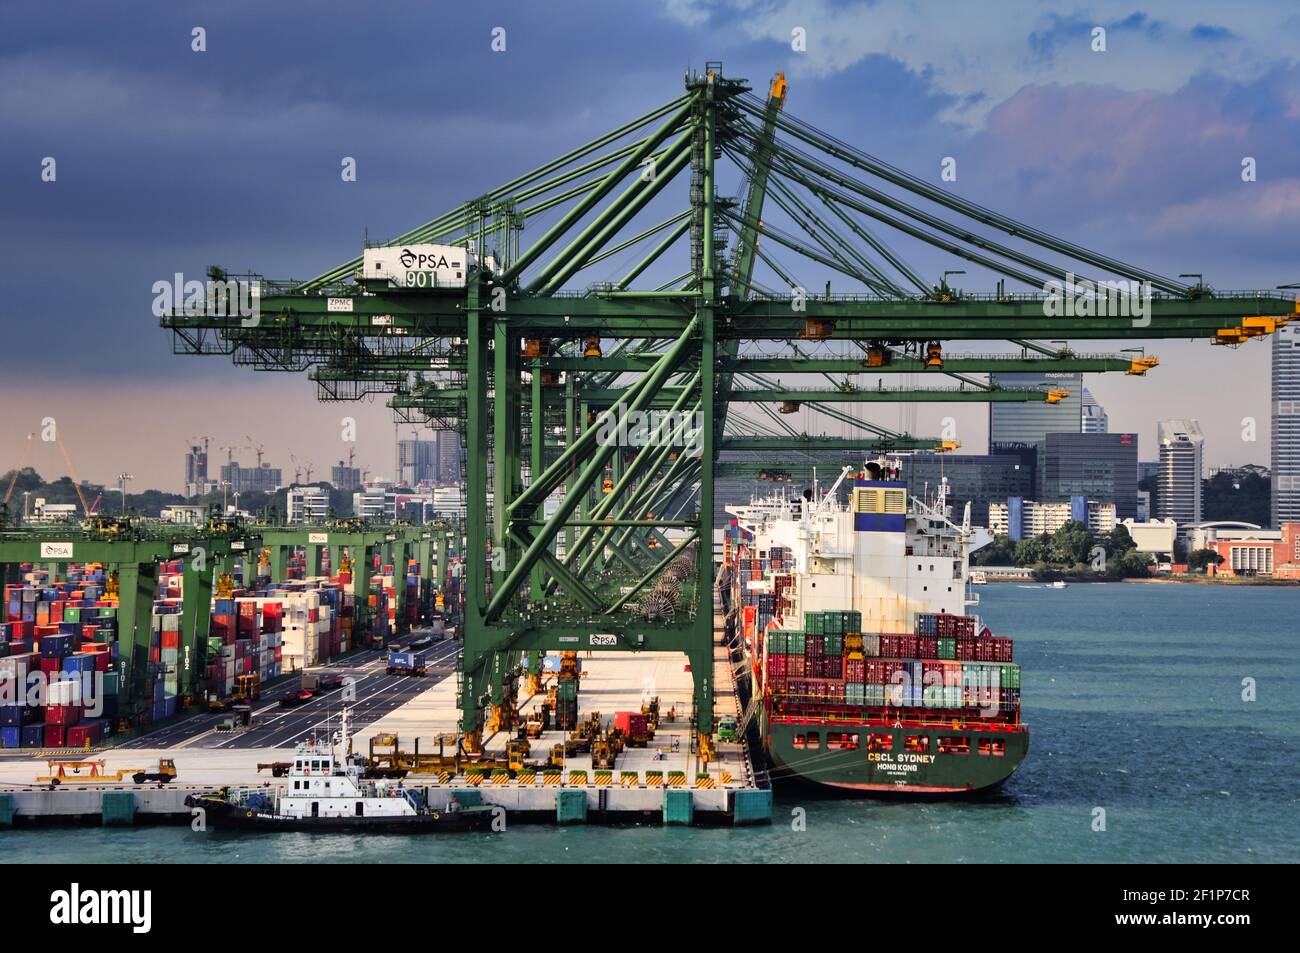 SINGAPORE, SINGAPORE - Apr 16, 2019: Picture taken when passing by container port Singapore with a cruise ship. Shows loading cranes rowed up loading Stock Photo